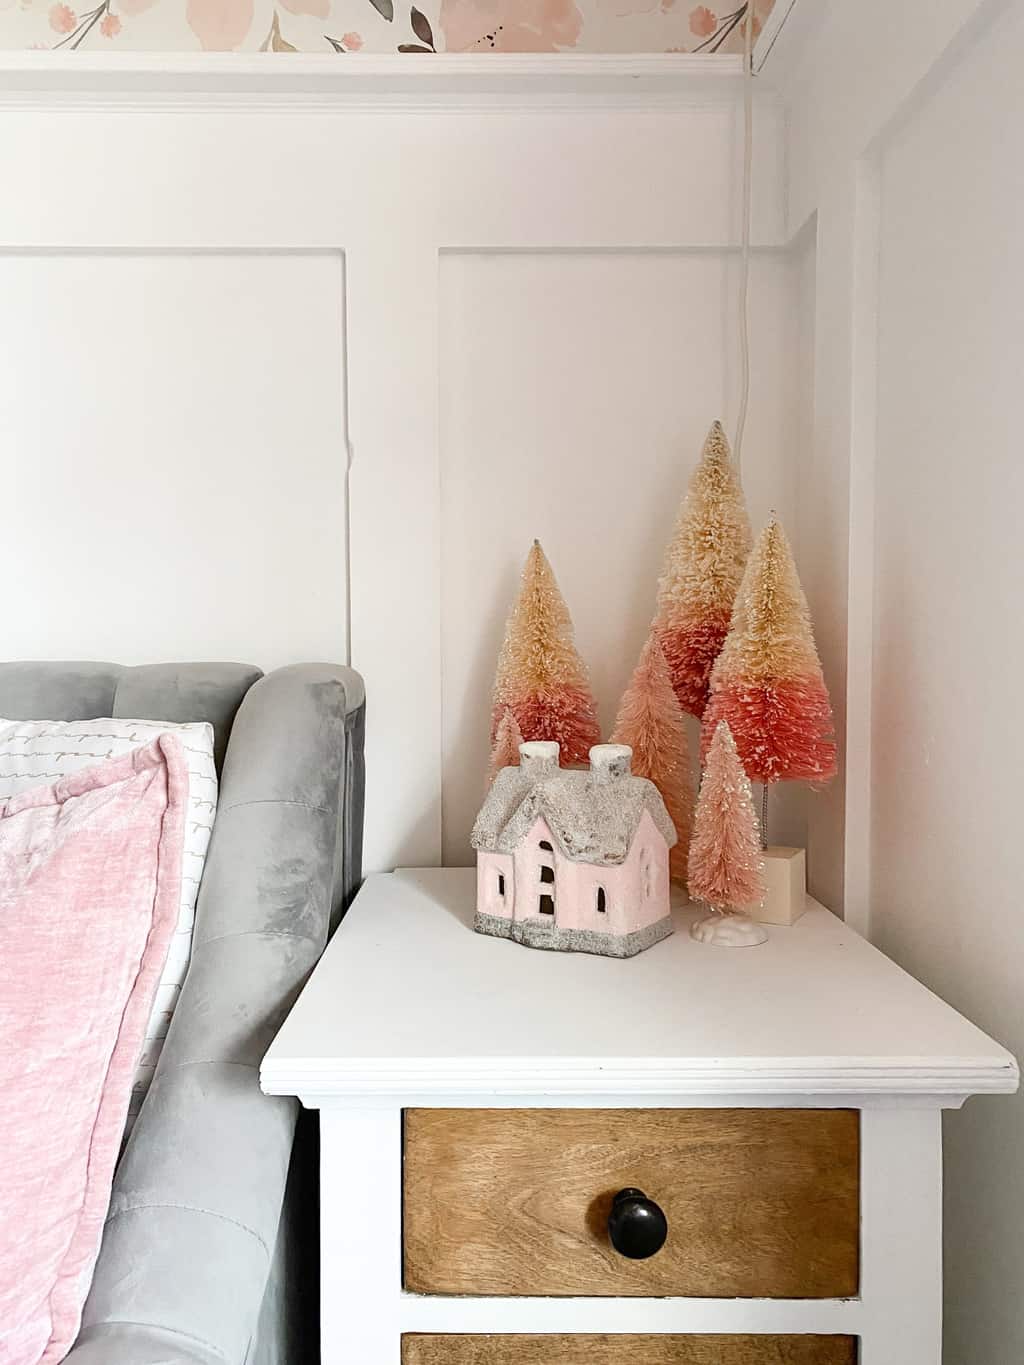 Decorating a girls room for the holidays is so much fun . This post shares simple Girls Bedroom Christmas Decor that will make the room sparkle and festive.